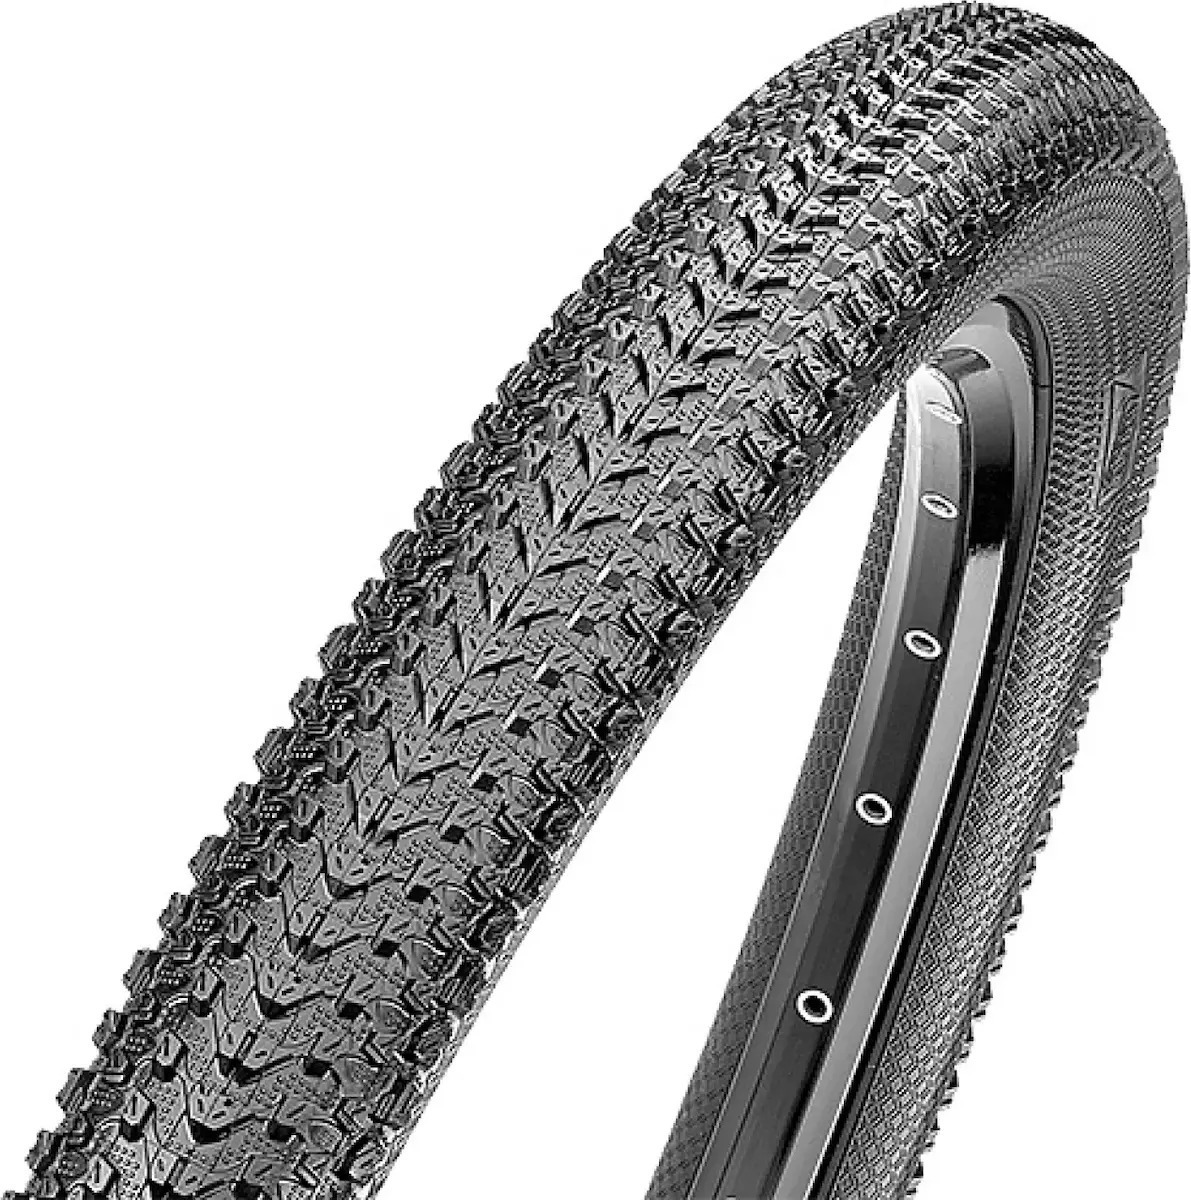 Maxxis Pace 27.5×2.10 27.5" Συρμα